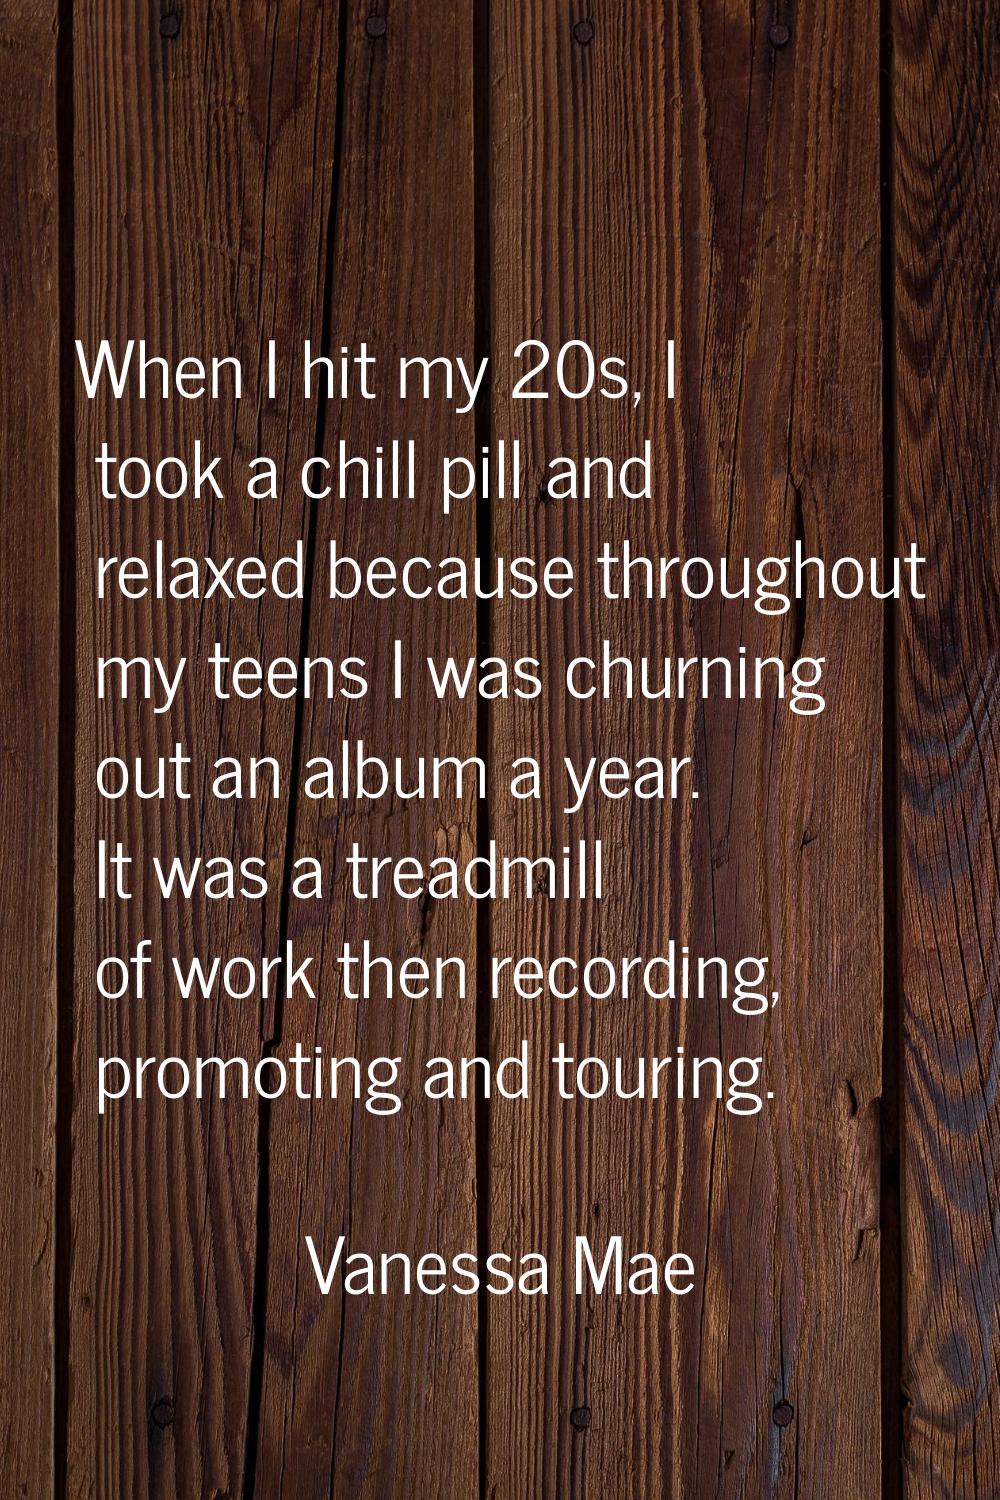 When I hit my 20s, I took a chill pill and relaxed because throughout my teens I was churning out a